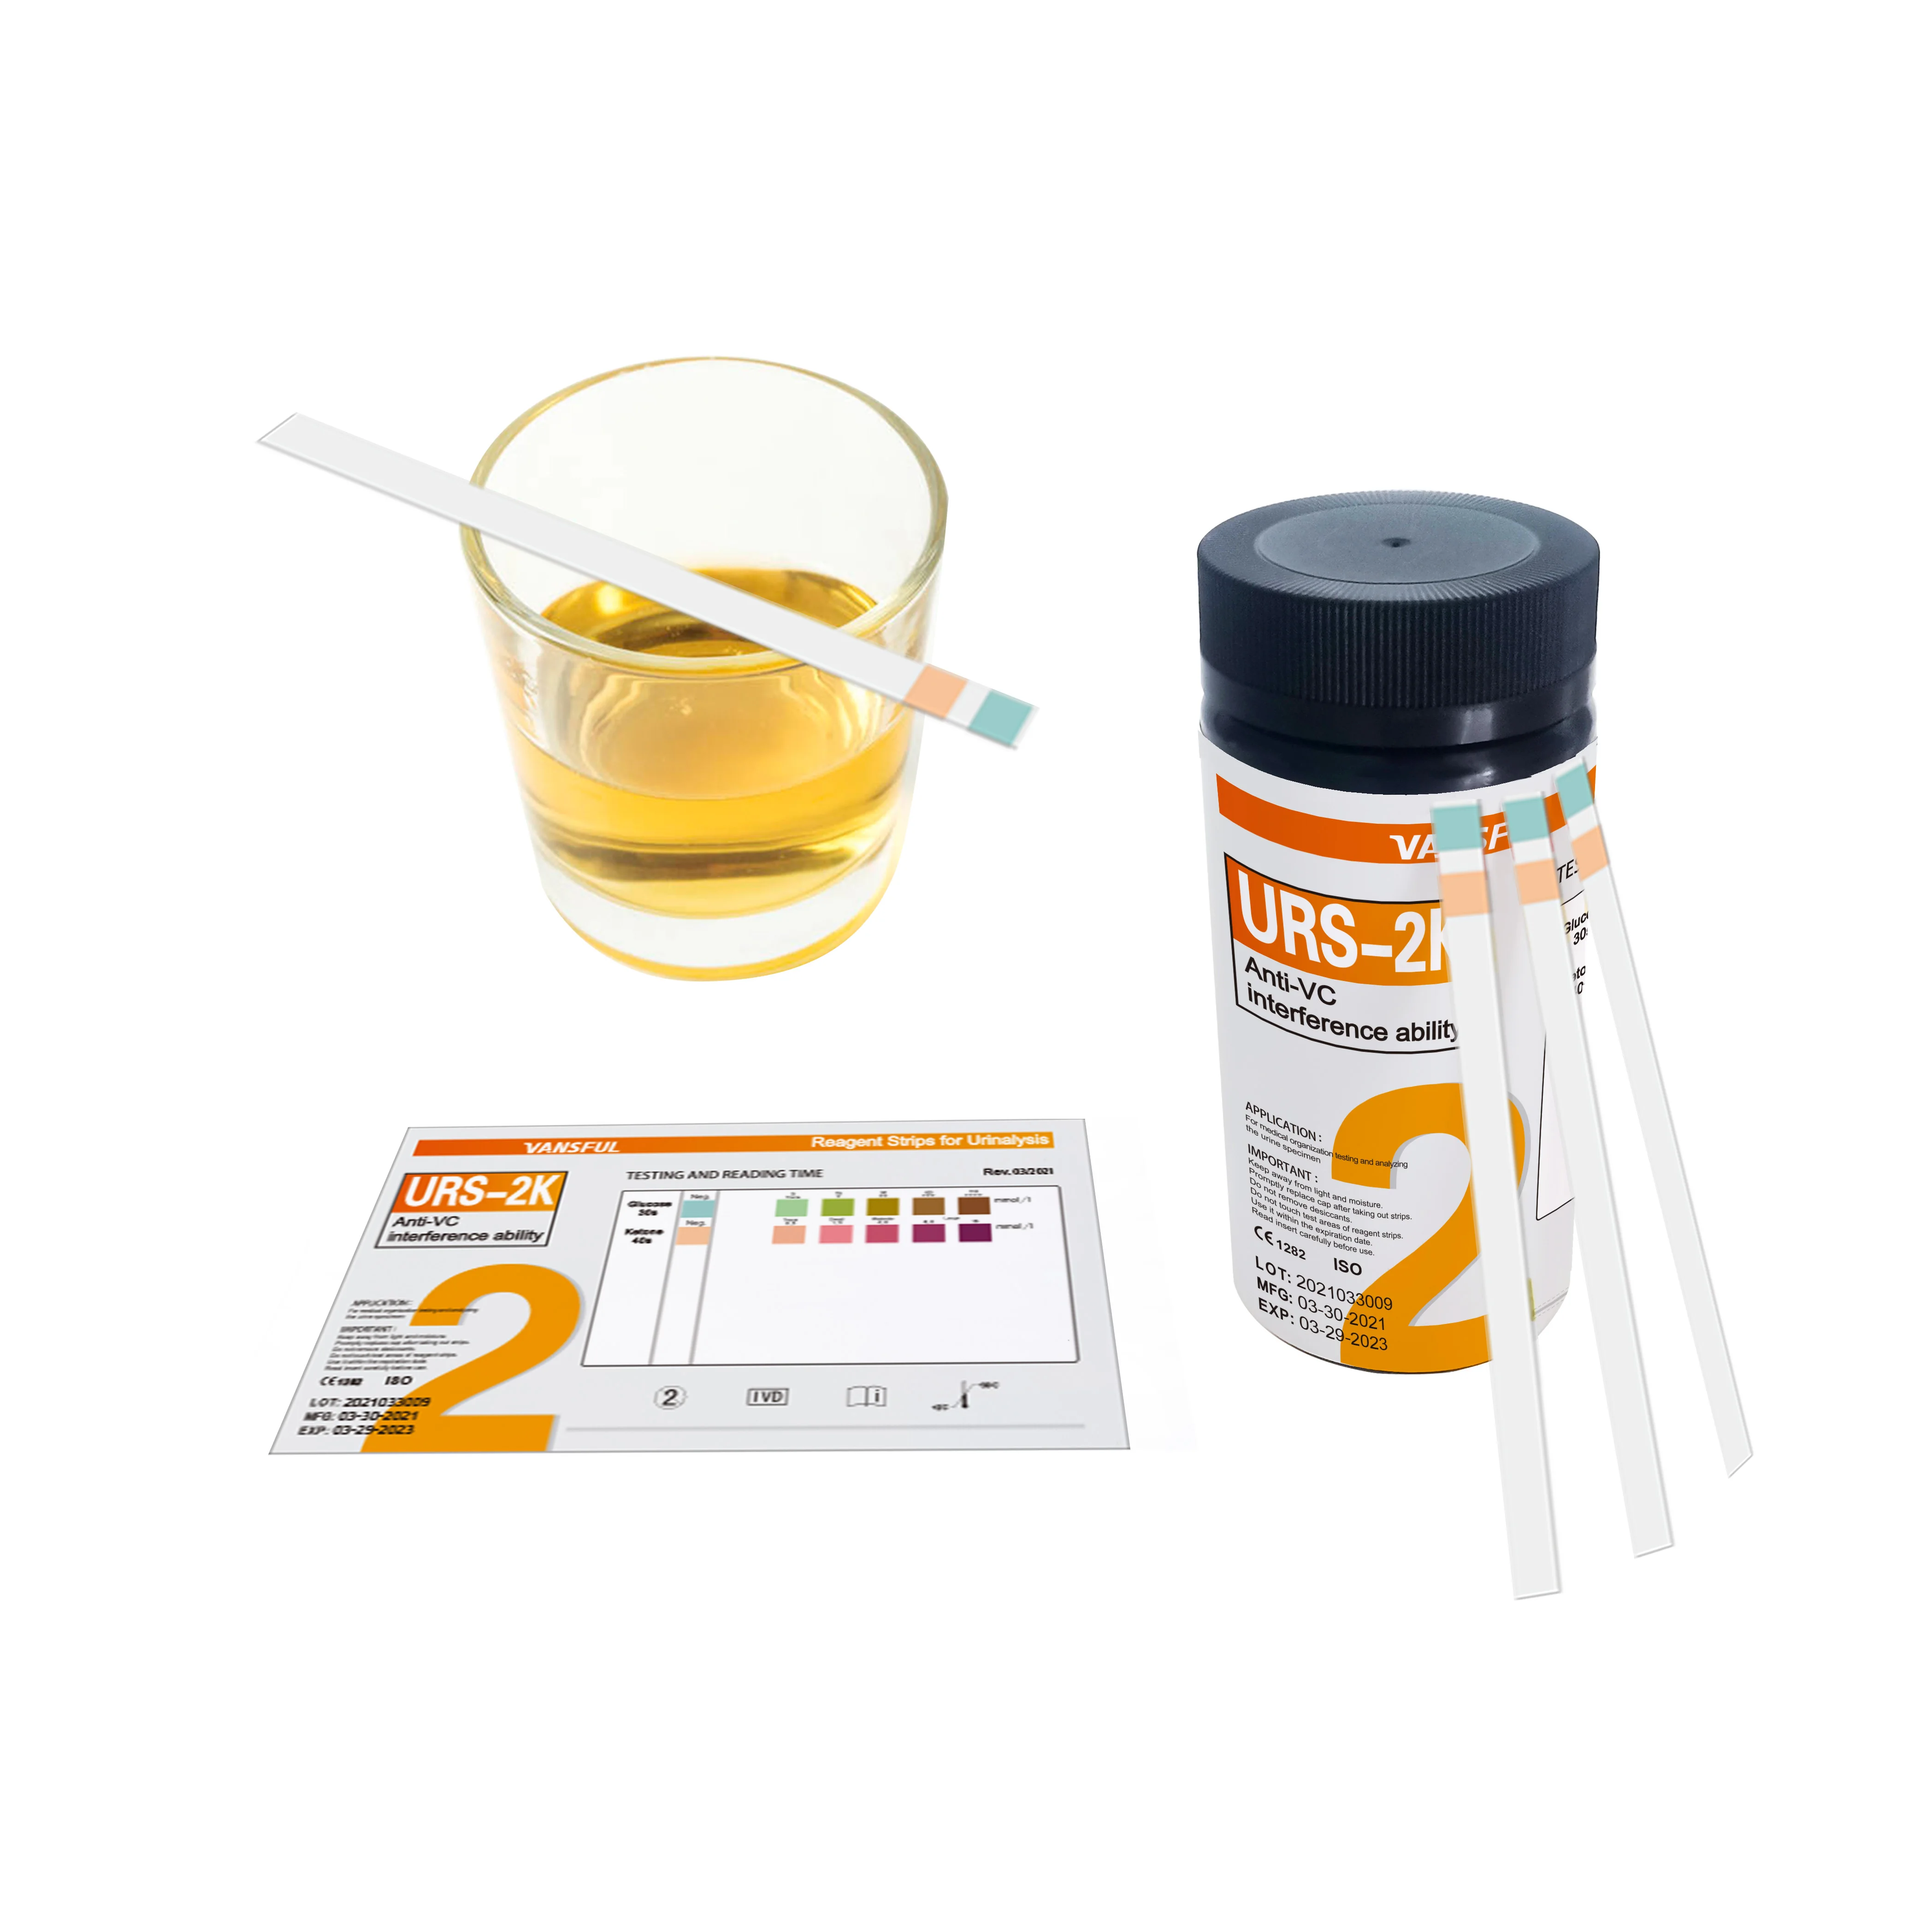 Widely Used Glucose and Ketone Reagent Test Strips URS-2K for Urine Test Diabetic Test Strips